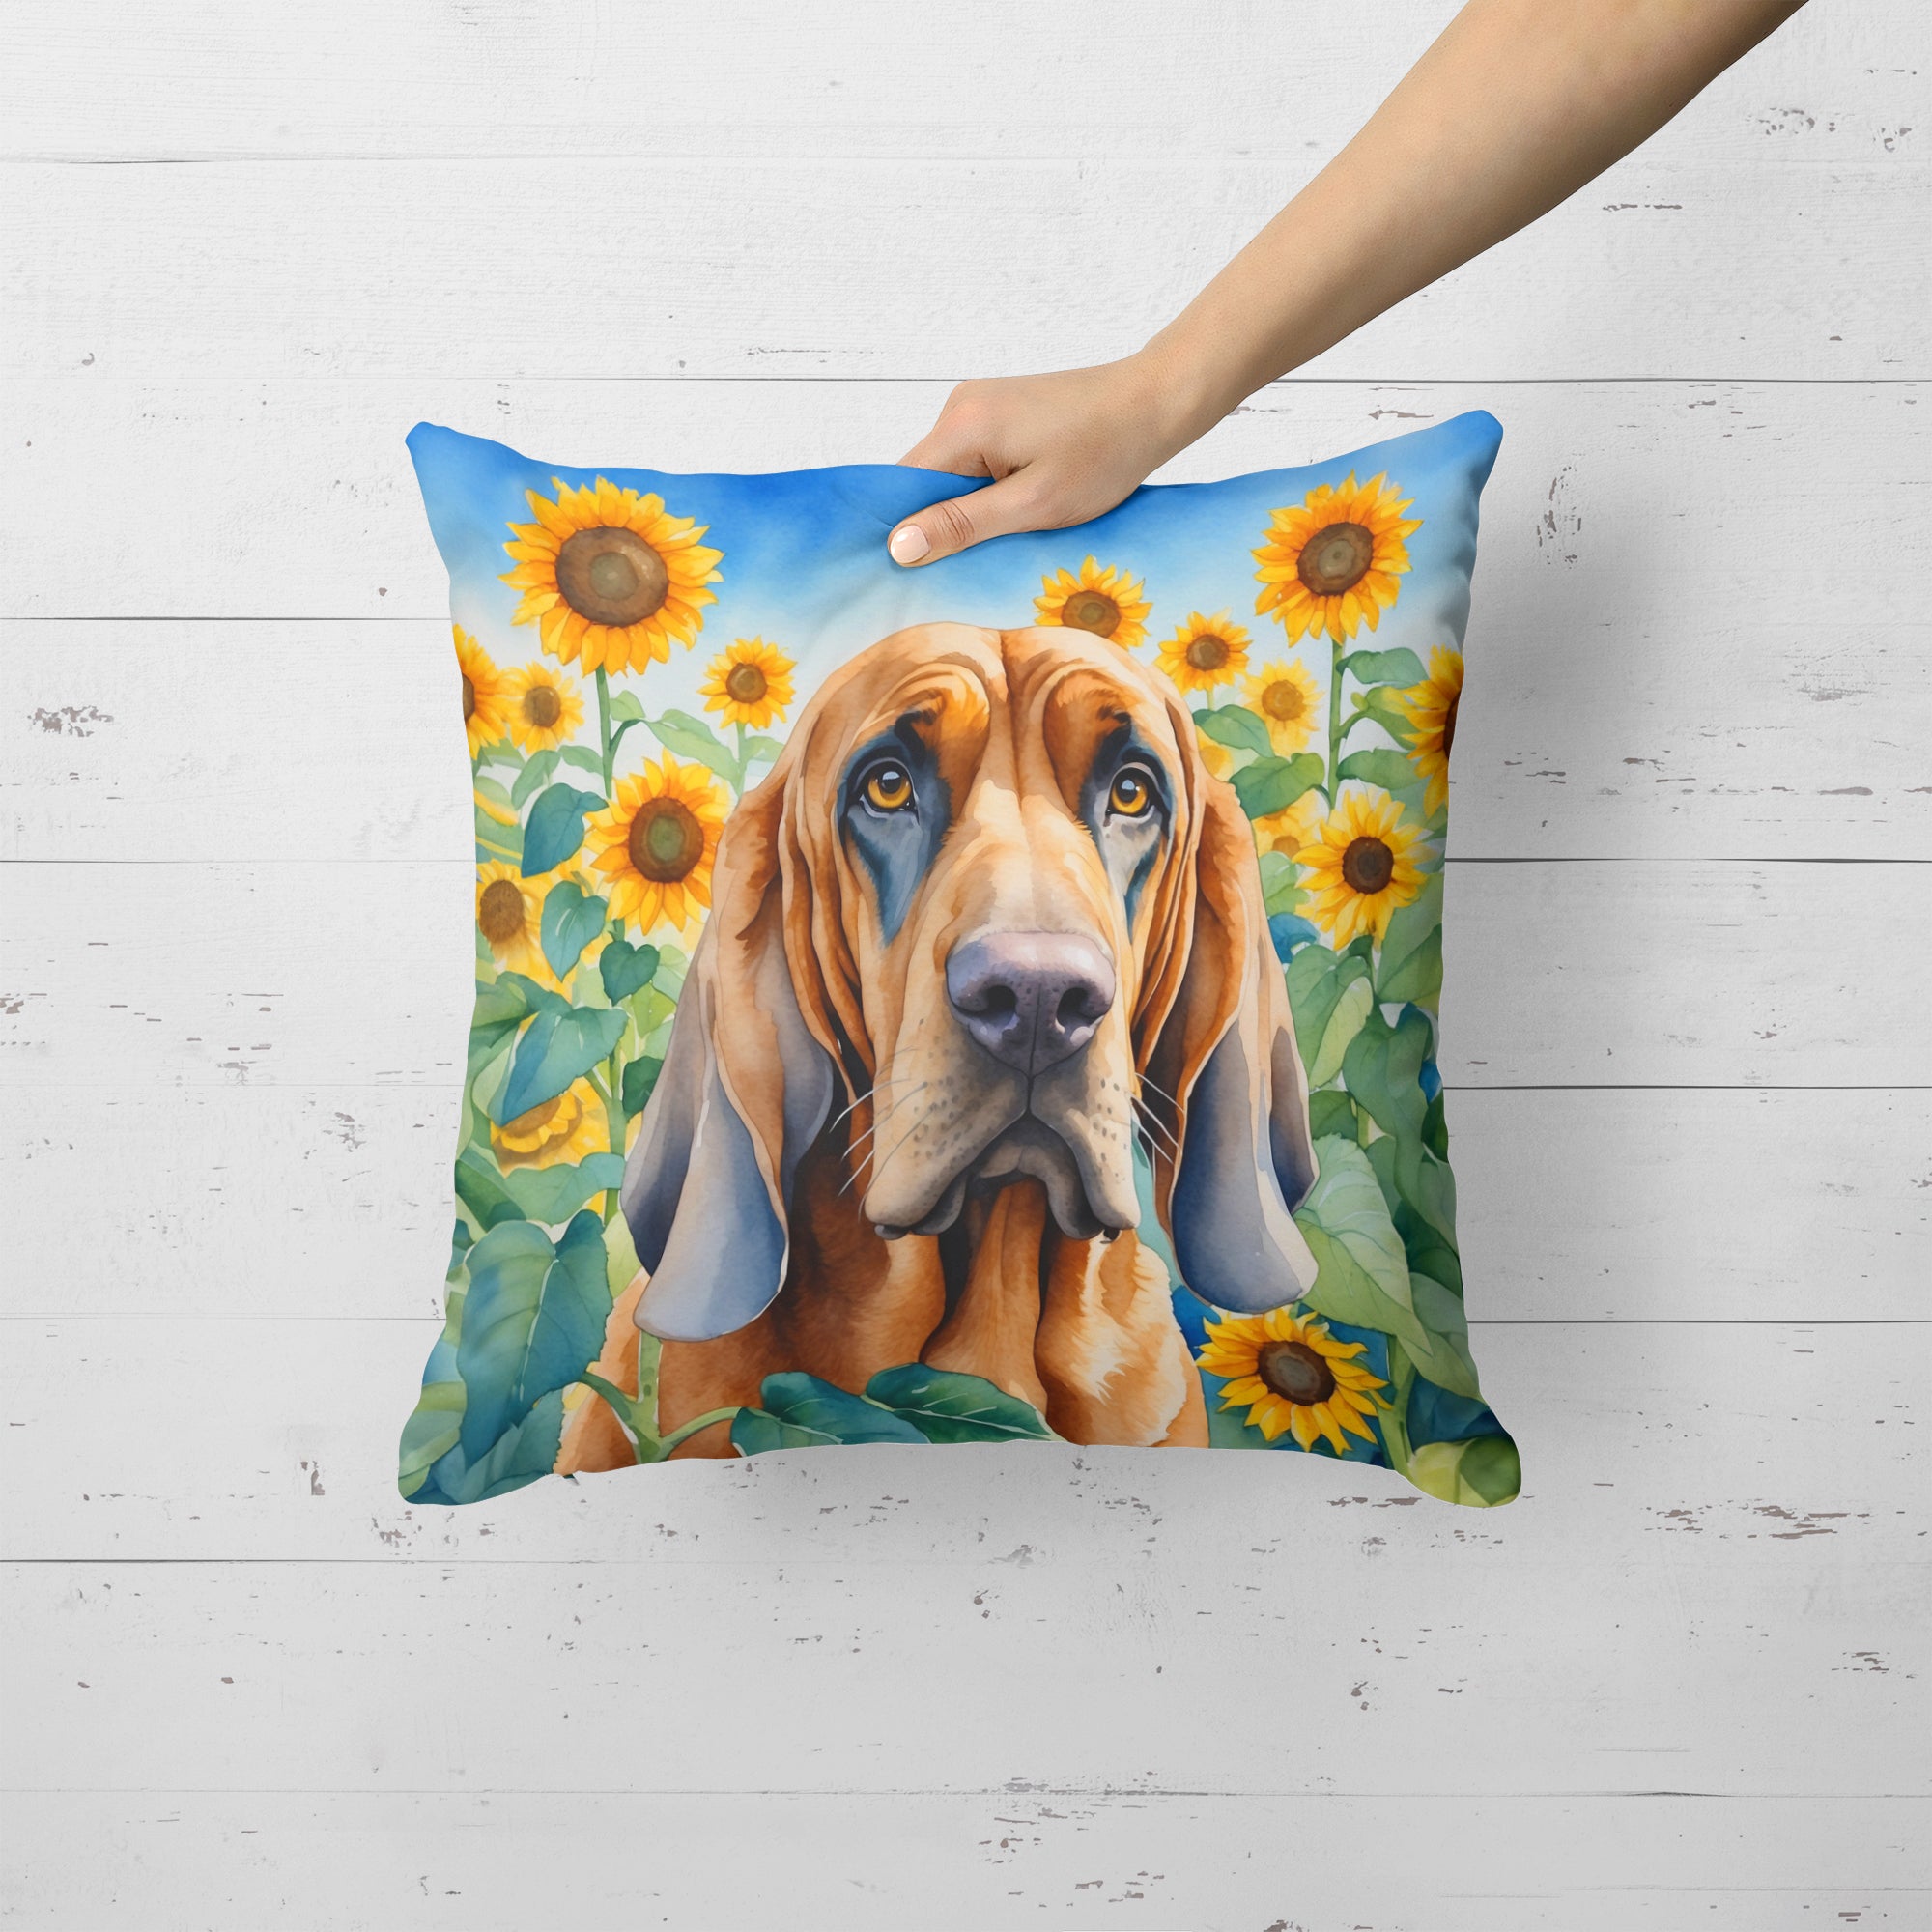 Buy this Bloodhound in Sunflowers Throw Pillow